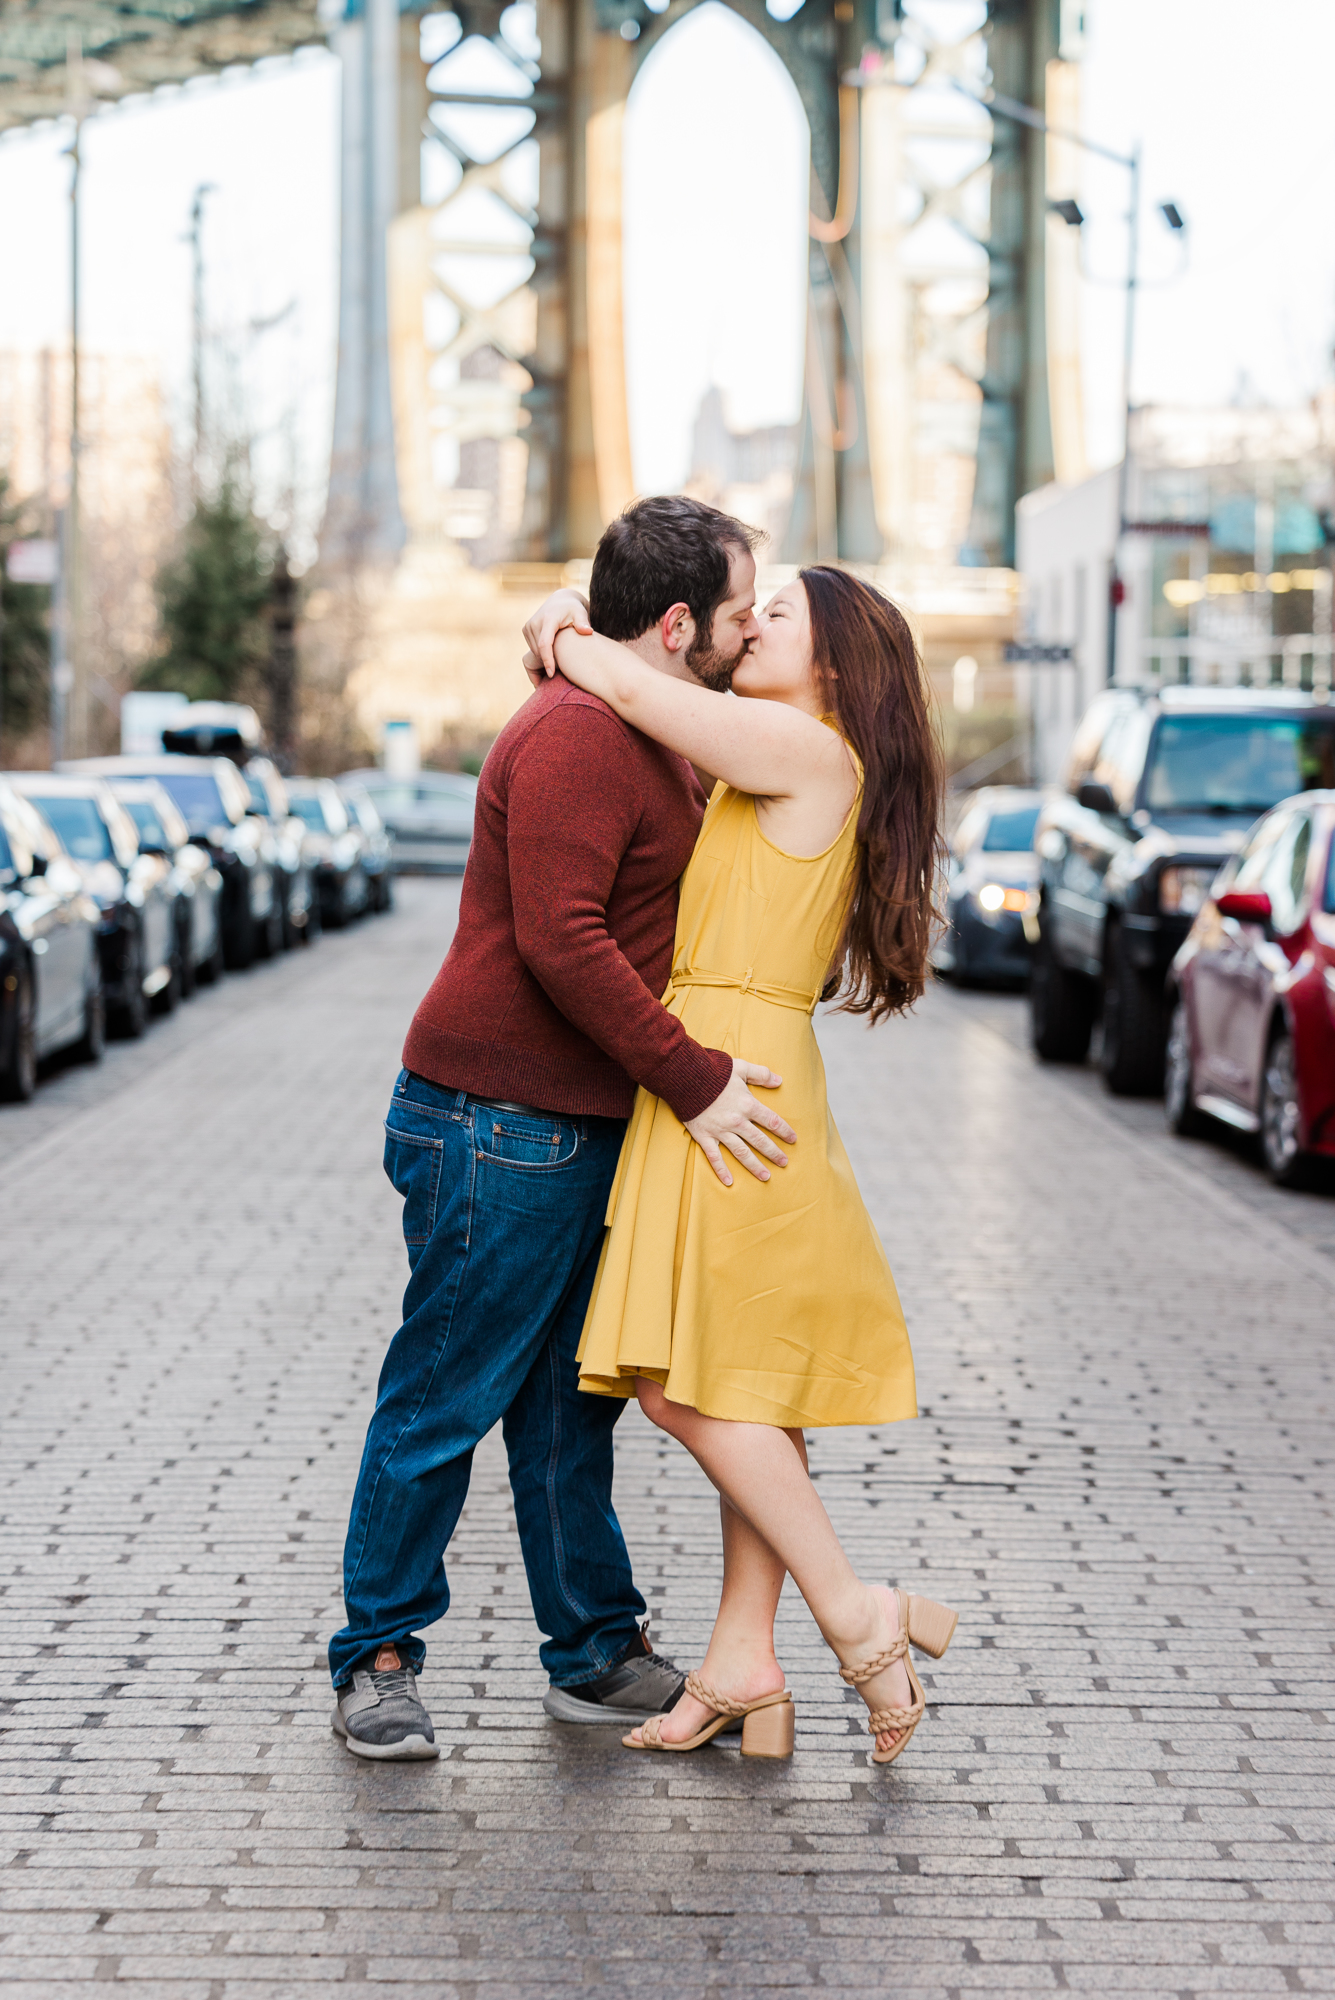 Flawless Brooklyn Bridge Engagement Photography with Matching Outfits